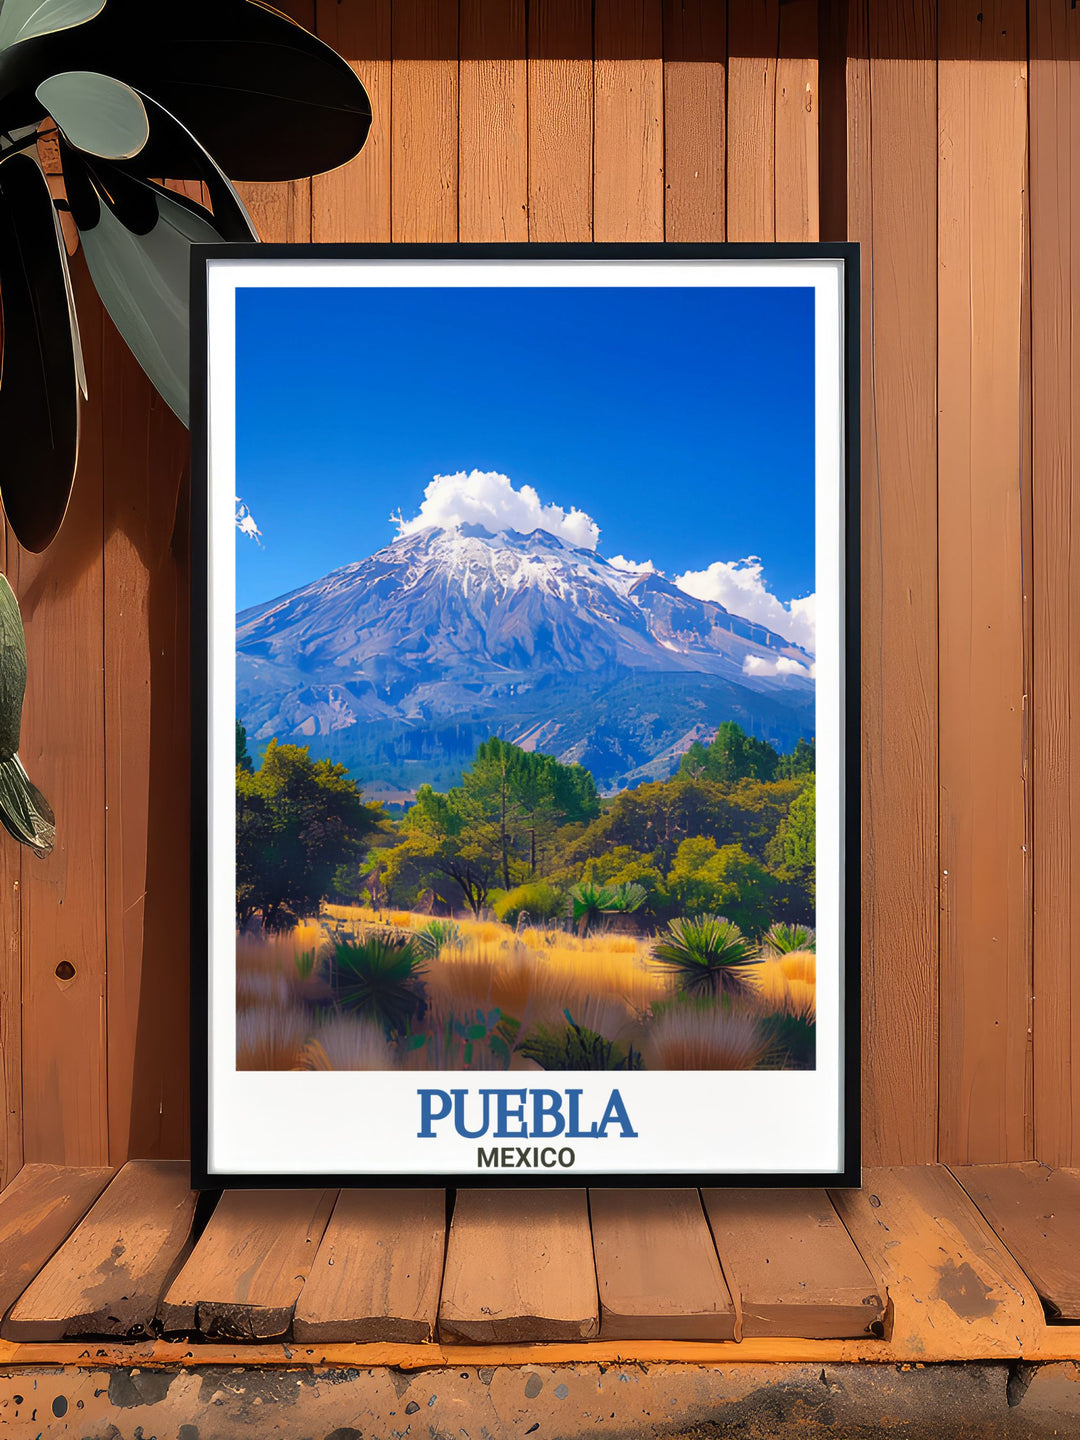 Artistic Puebla Painting capturing the charm and vibrancy of this Mexican city La Malinche Elegant Home Decor pieces designed to add sophistication and natural beauty to any room perfect for personalized gifts and travel poster prints